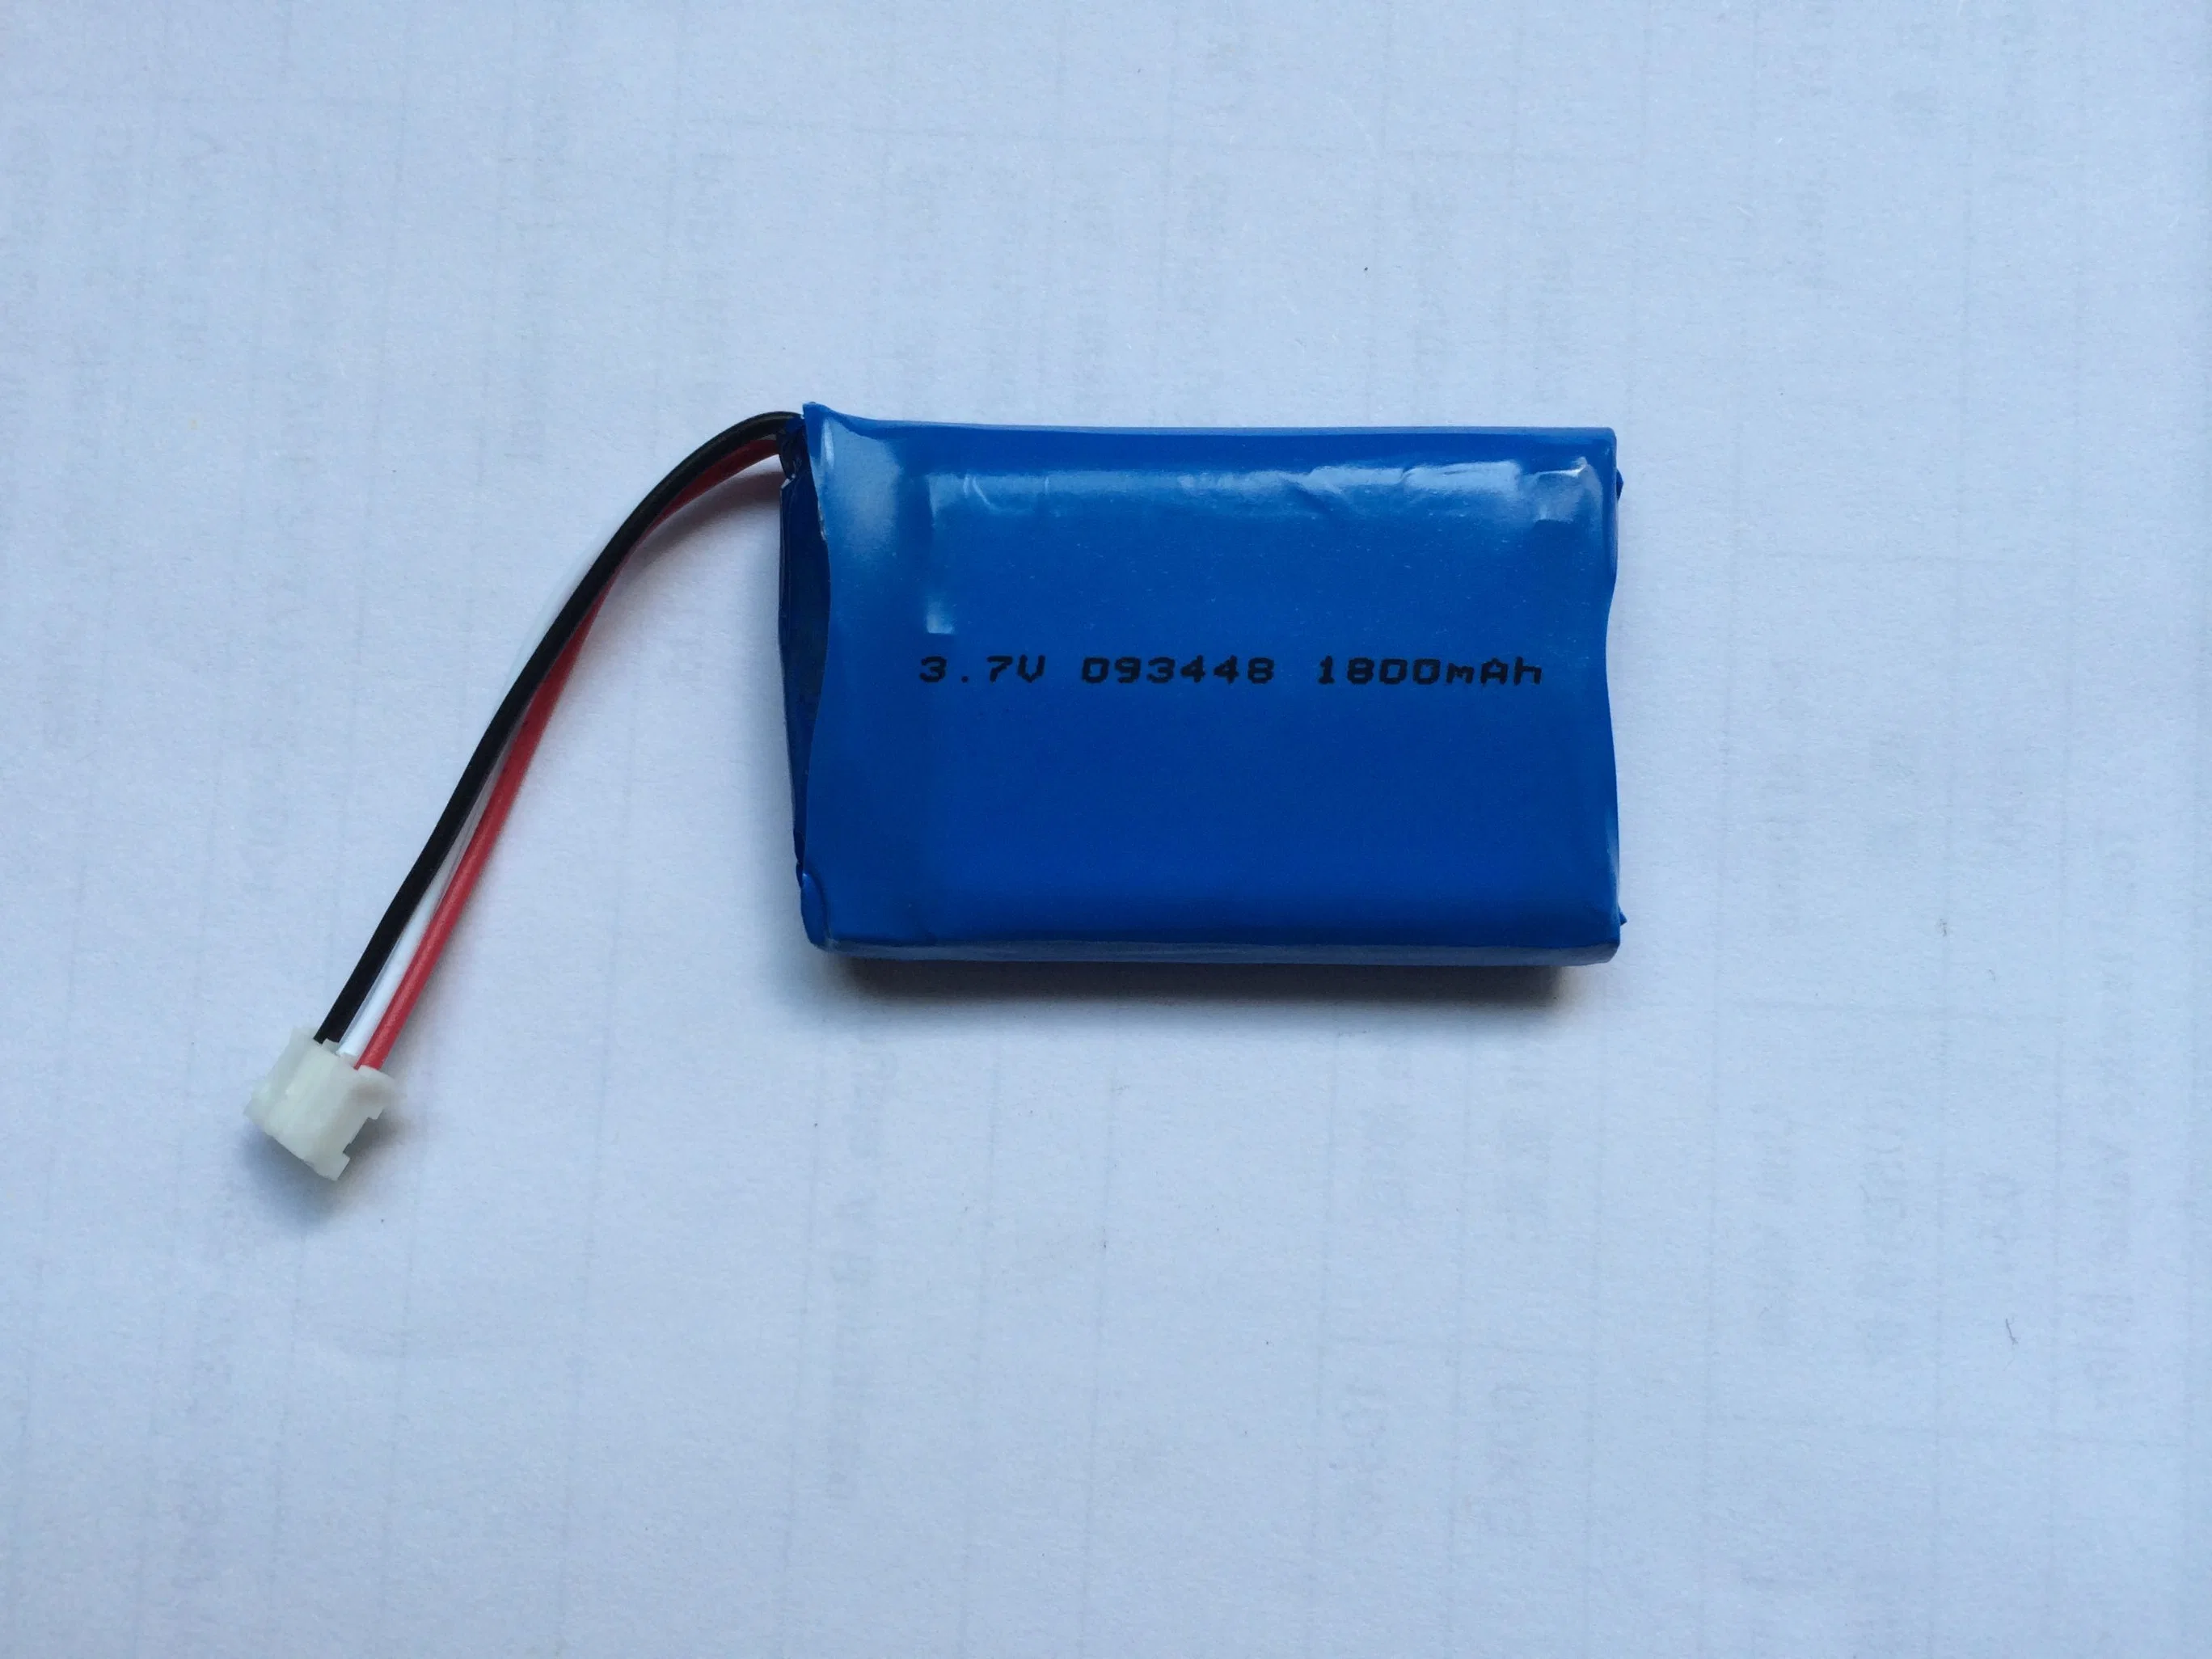 Lithium Ion Polymer Battery 3.7 V 500mAh Ion Polymer 4500 mAh Lithium Ion Polymer Battery 14.8 V Lipo Battery